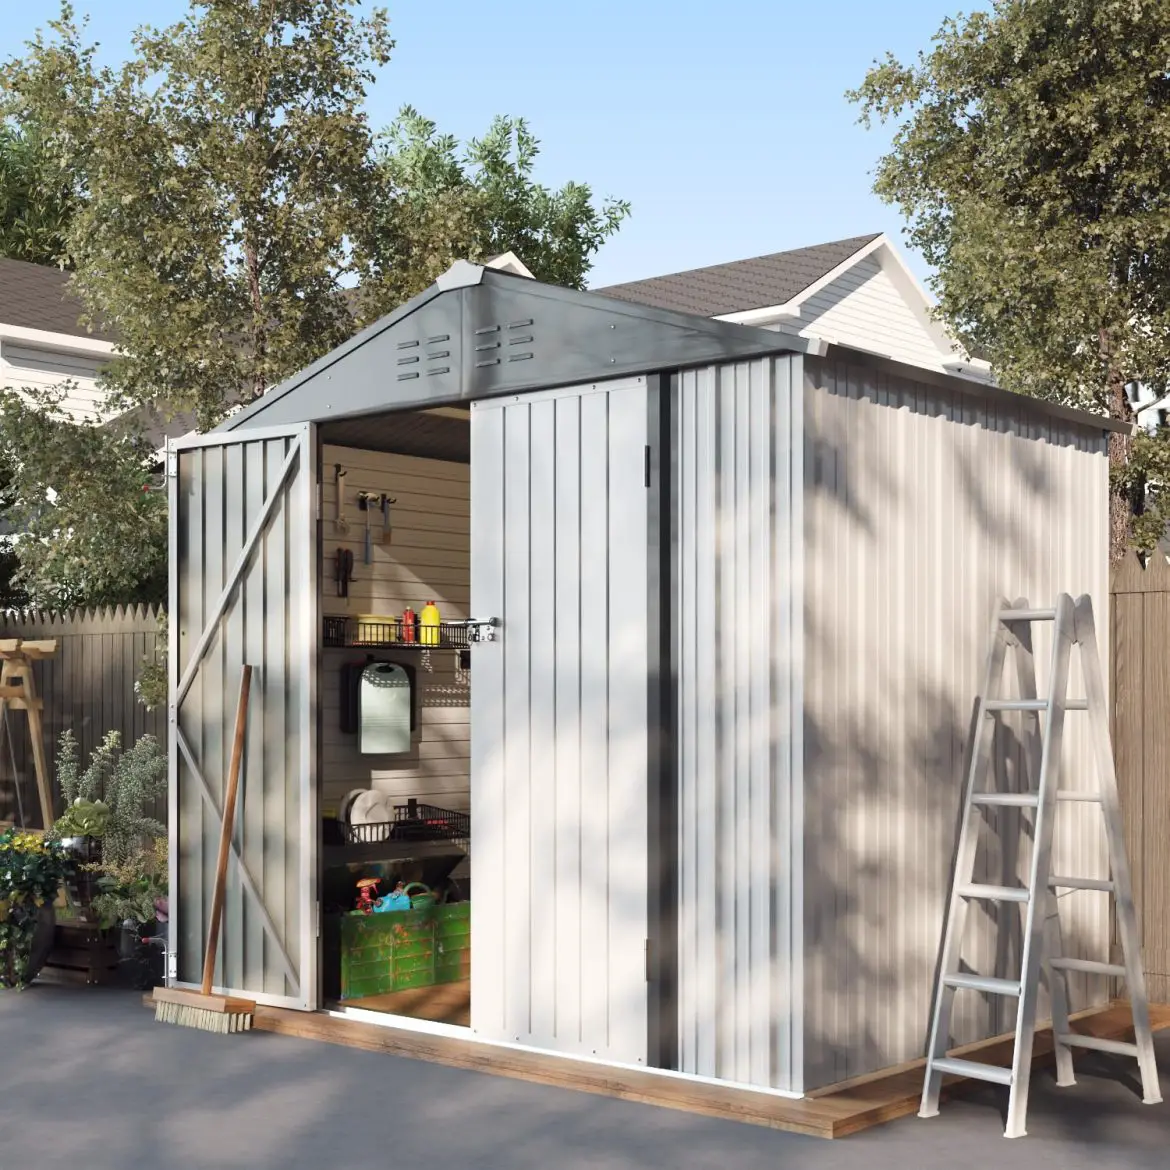 Outdoor Storage Simplified: Amazon’s Top 10 White Metal Sheds